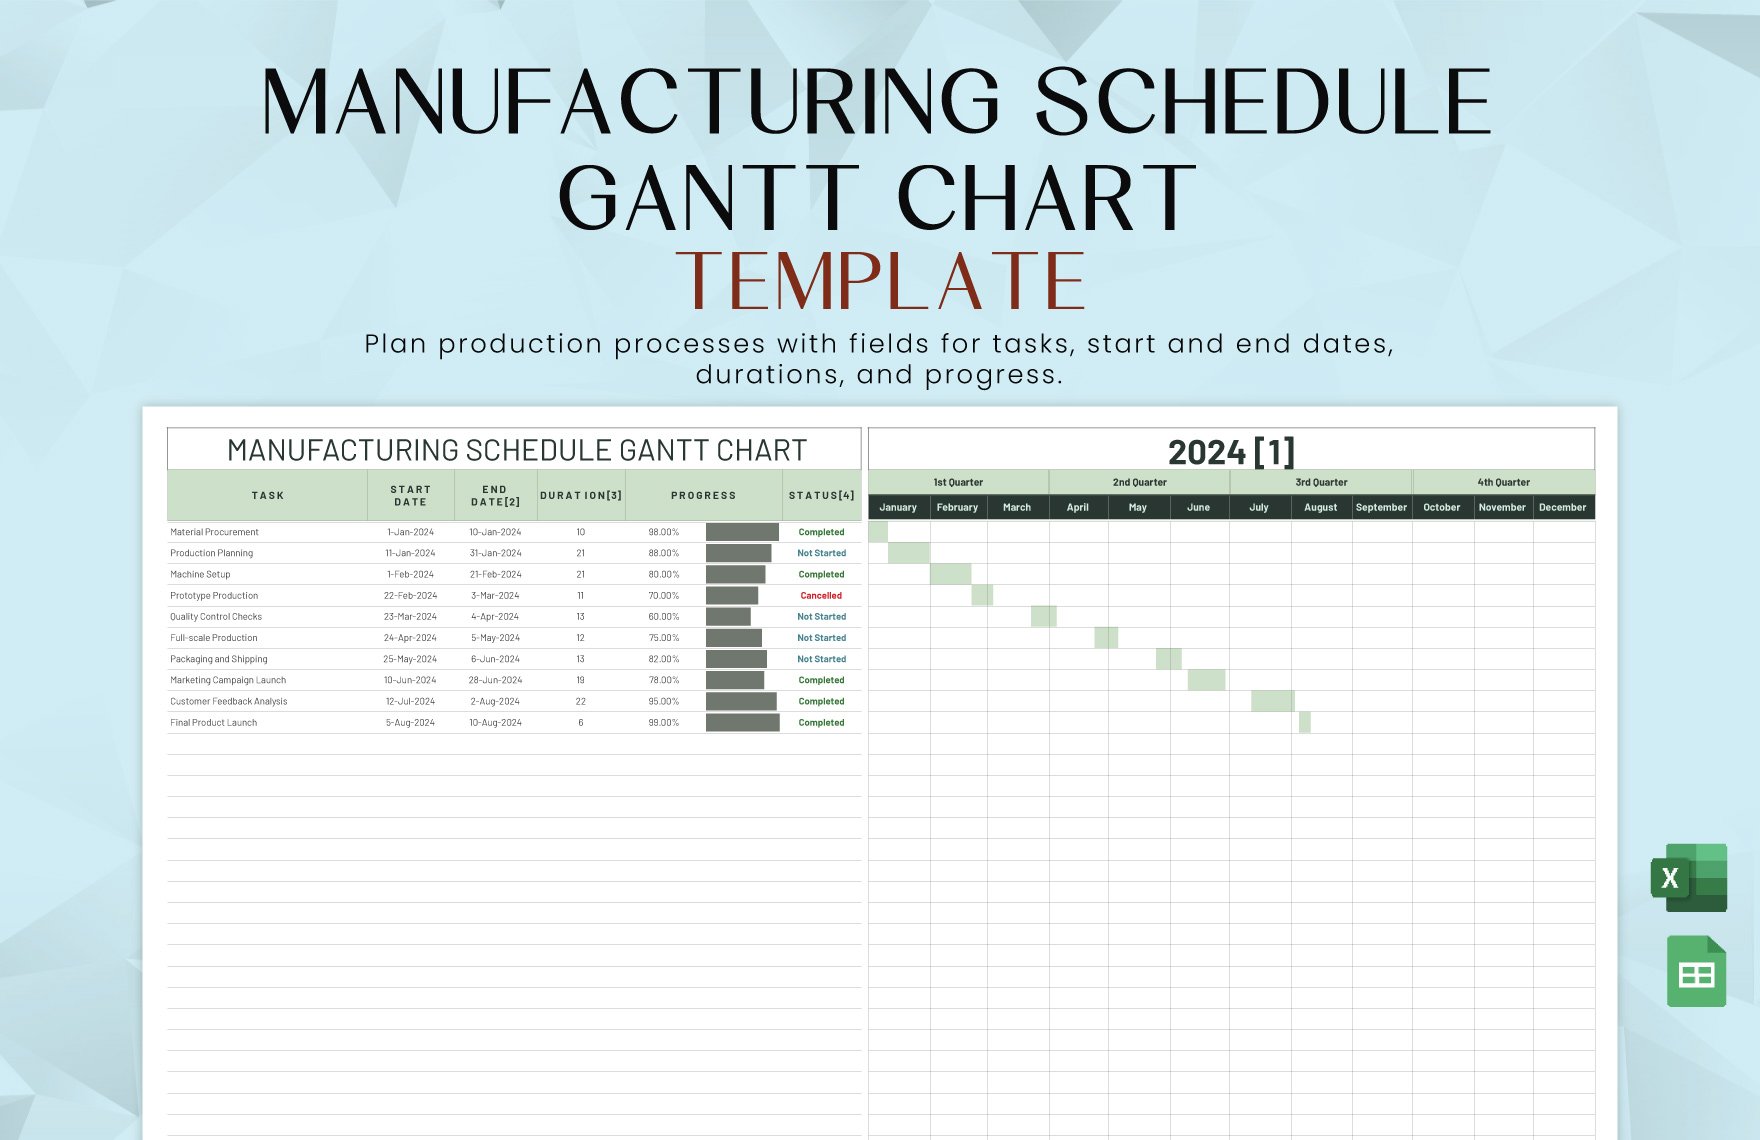 Free Manufacturing Schedule Gantt Chart Template in Excel, Google Sheets